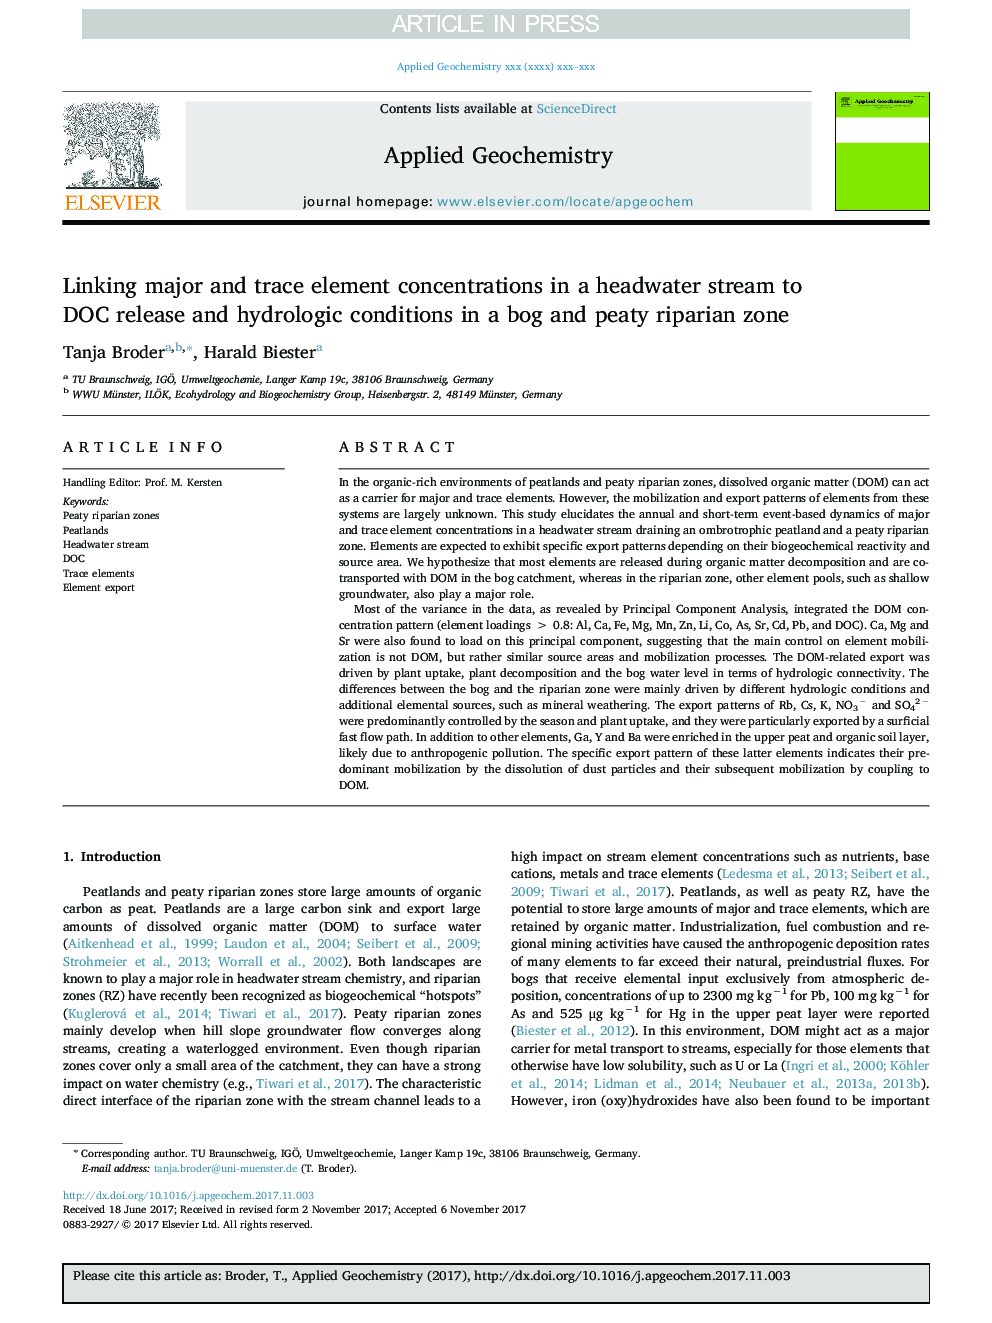 Linking major and trace element concentrations in a headwater stream to DOC release and hydrologic conditions in a bog and peaty riparian zone